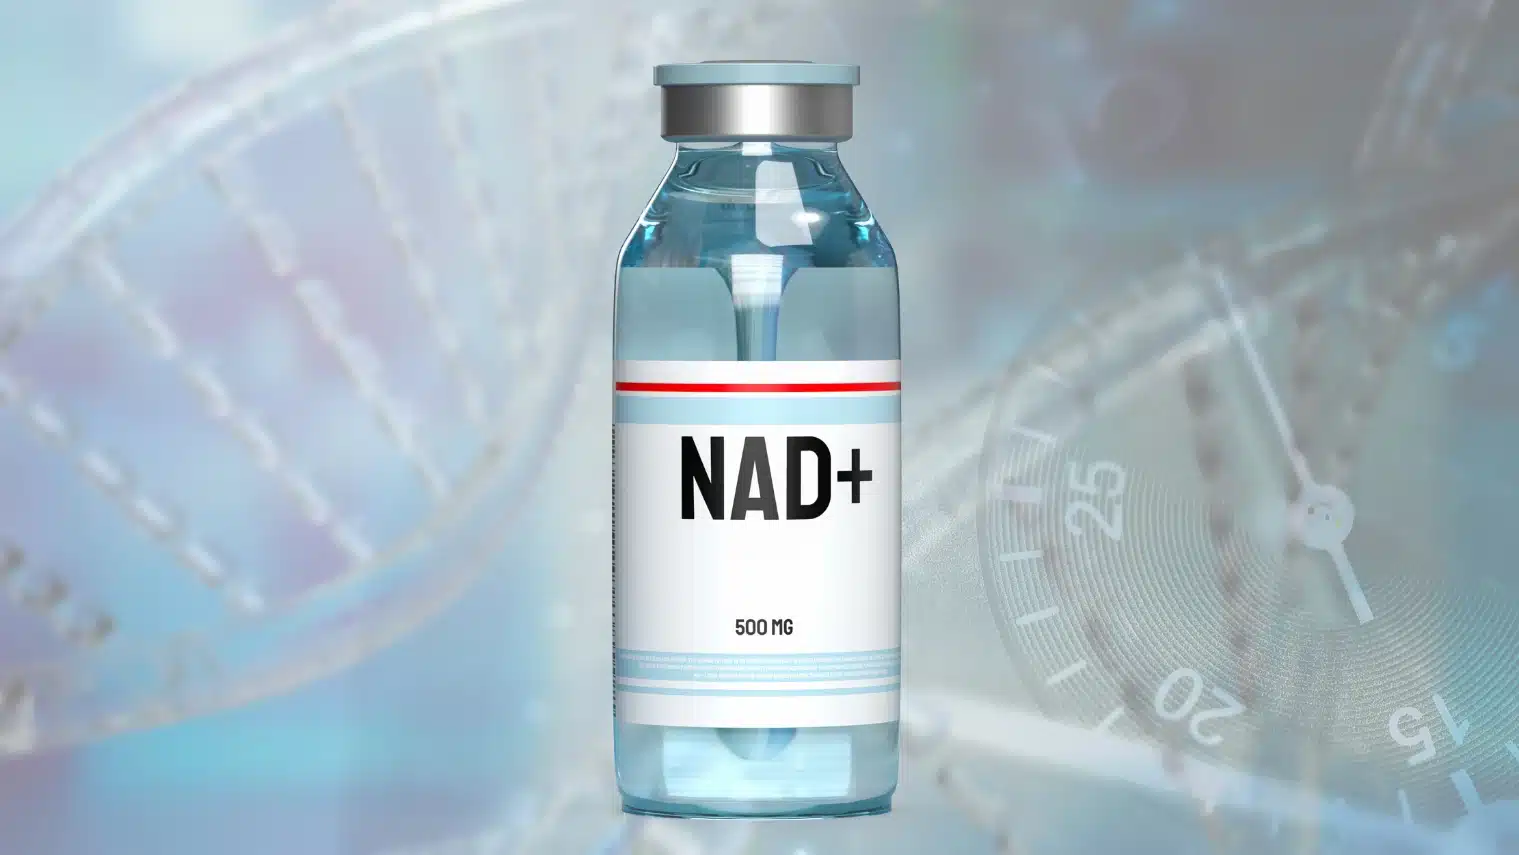 This article delves into the fascinating world of NAD+ and its application in anti-aging IV therapy